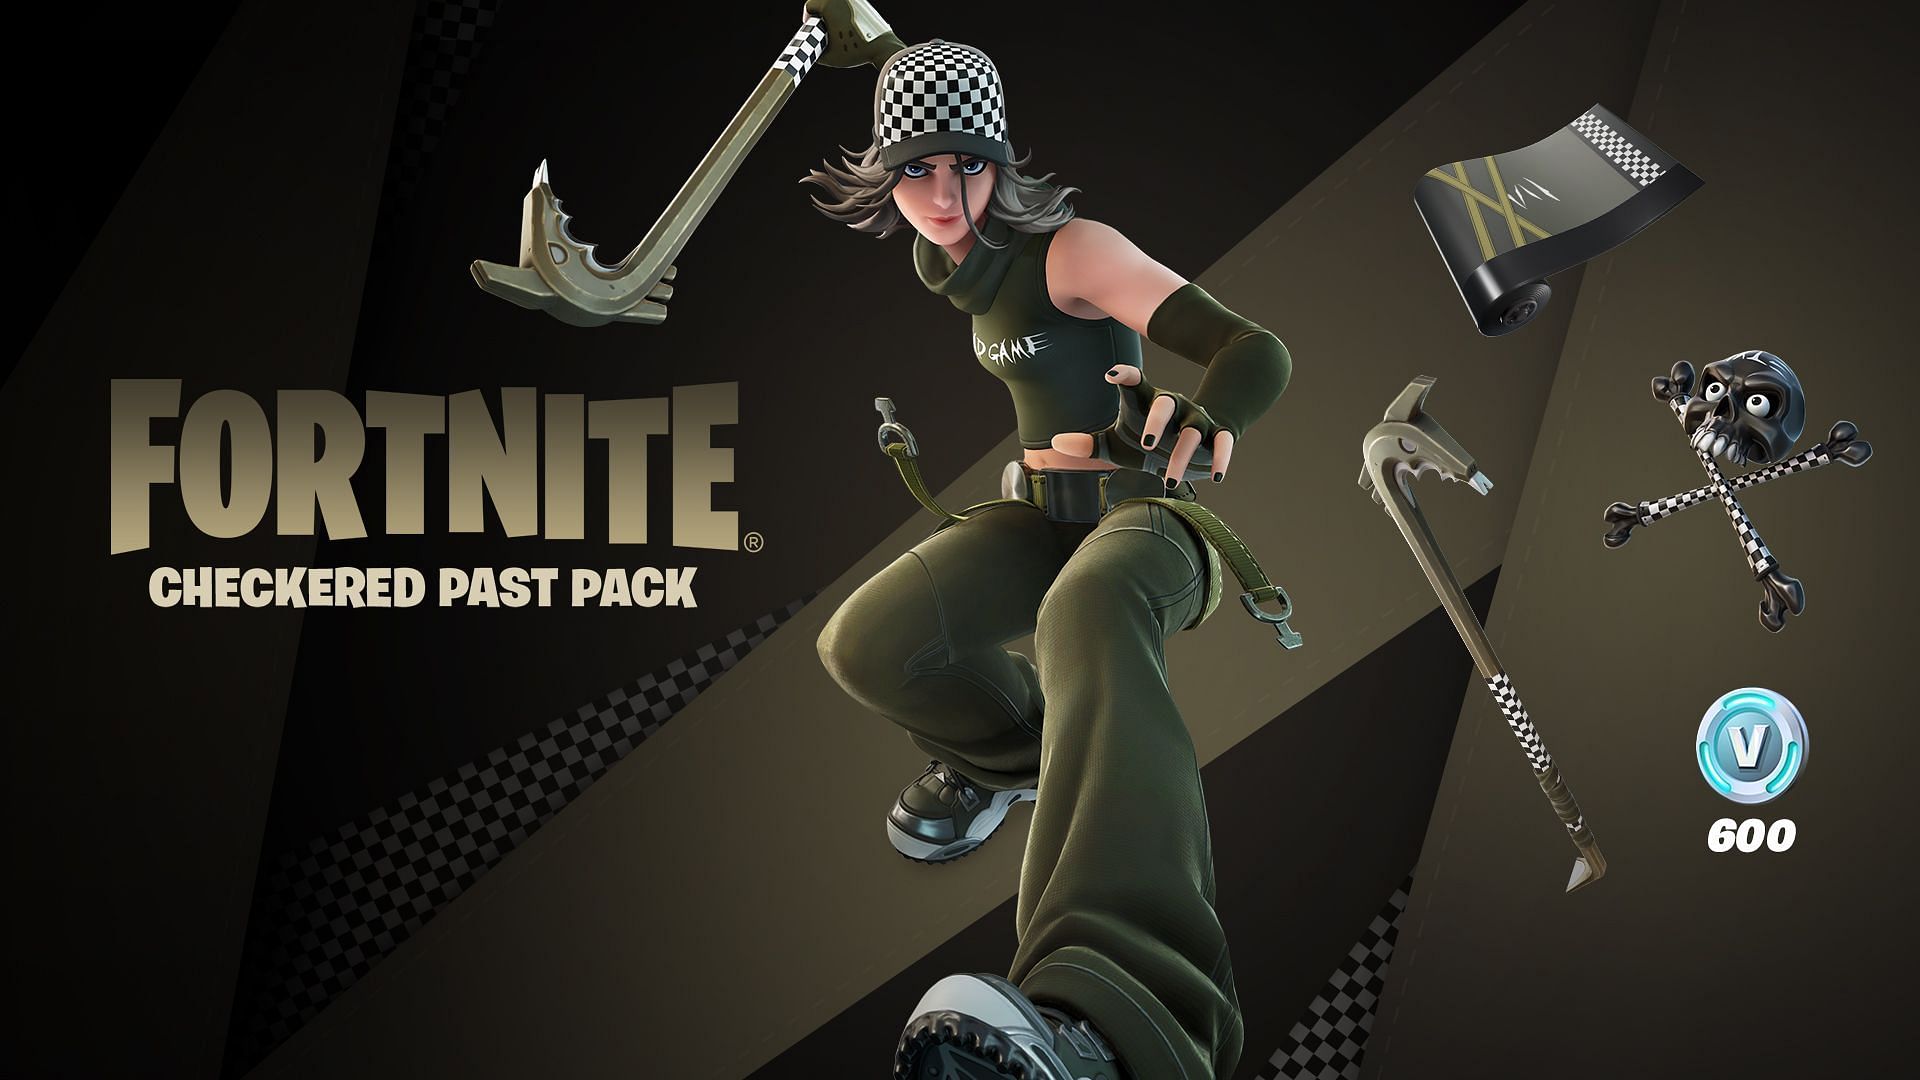 Checkered Past Pack costs $3.99 (Image via Epic Games/Fortnite)